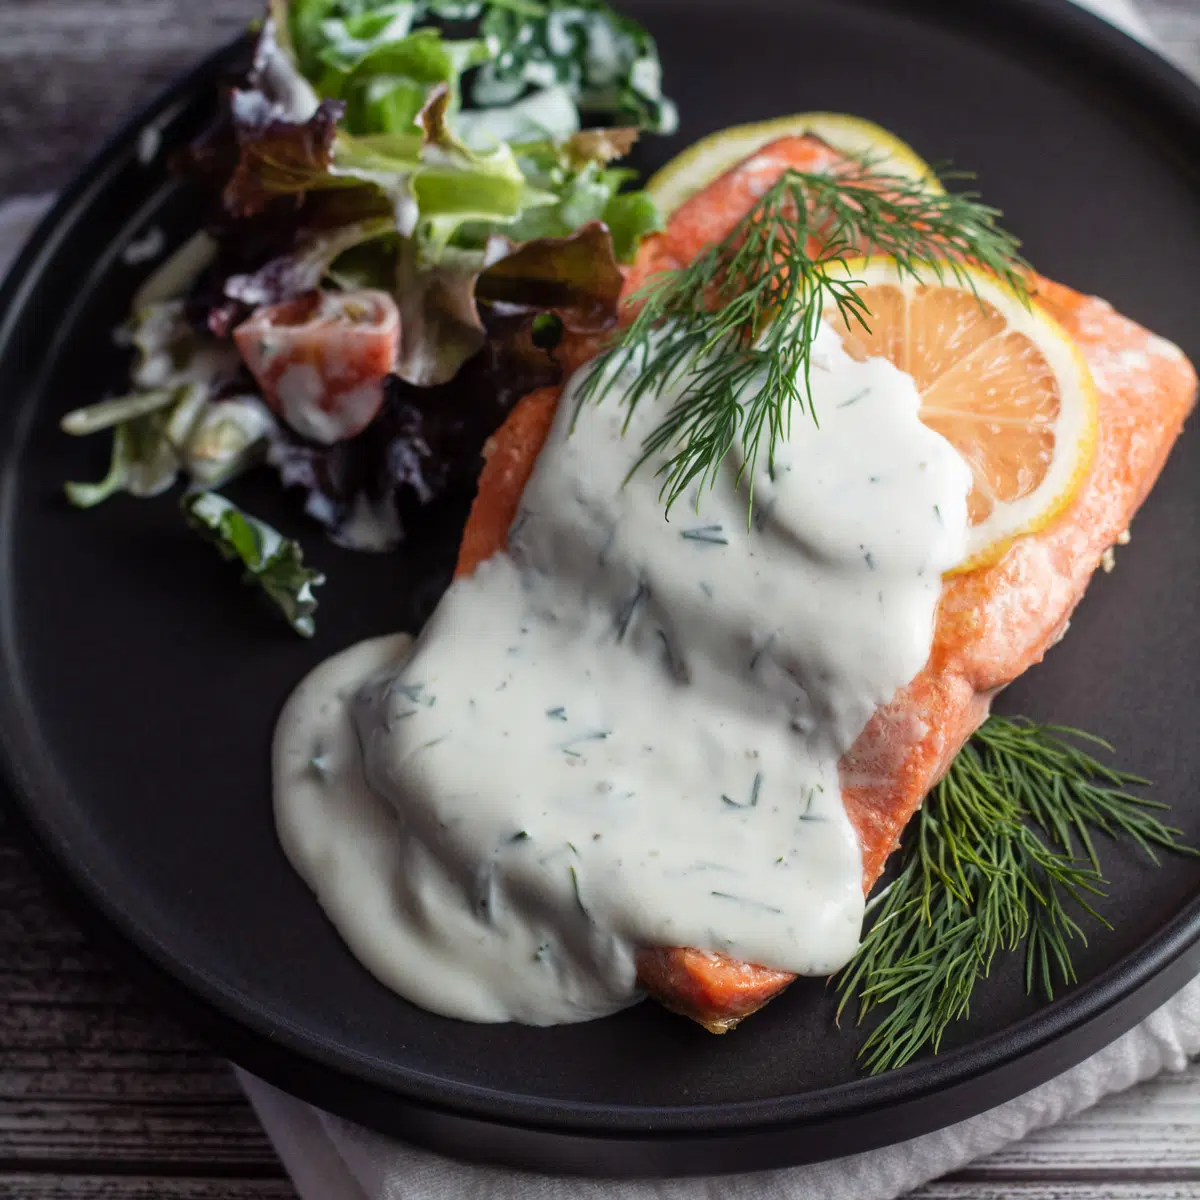 Square image of salmon with dillsauce on a black plate with lemon slice.